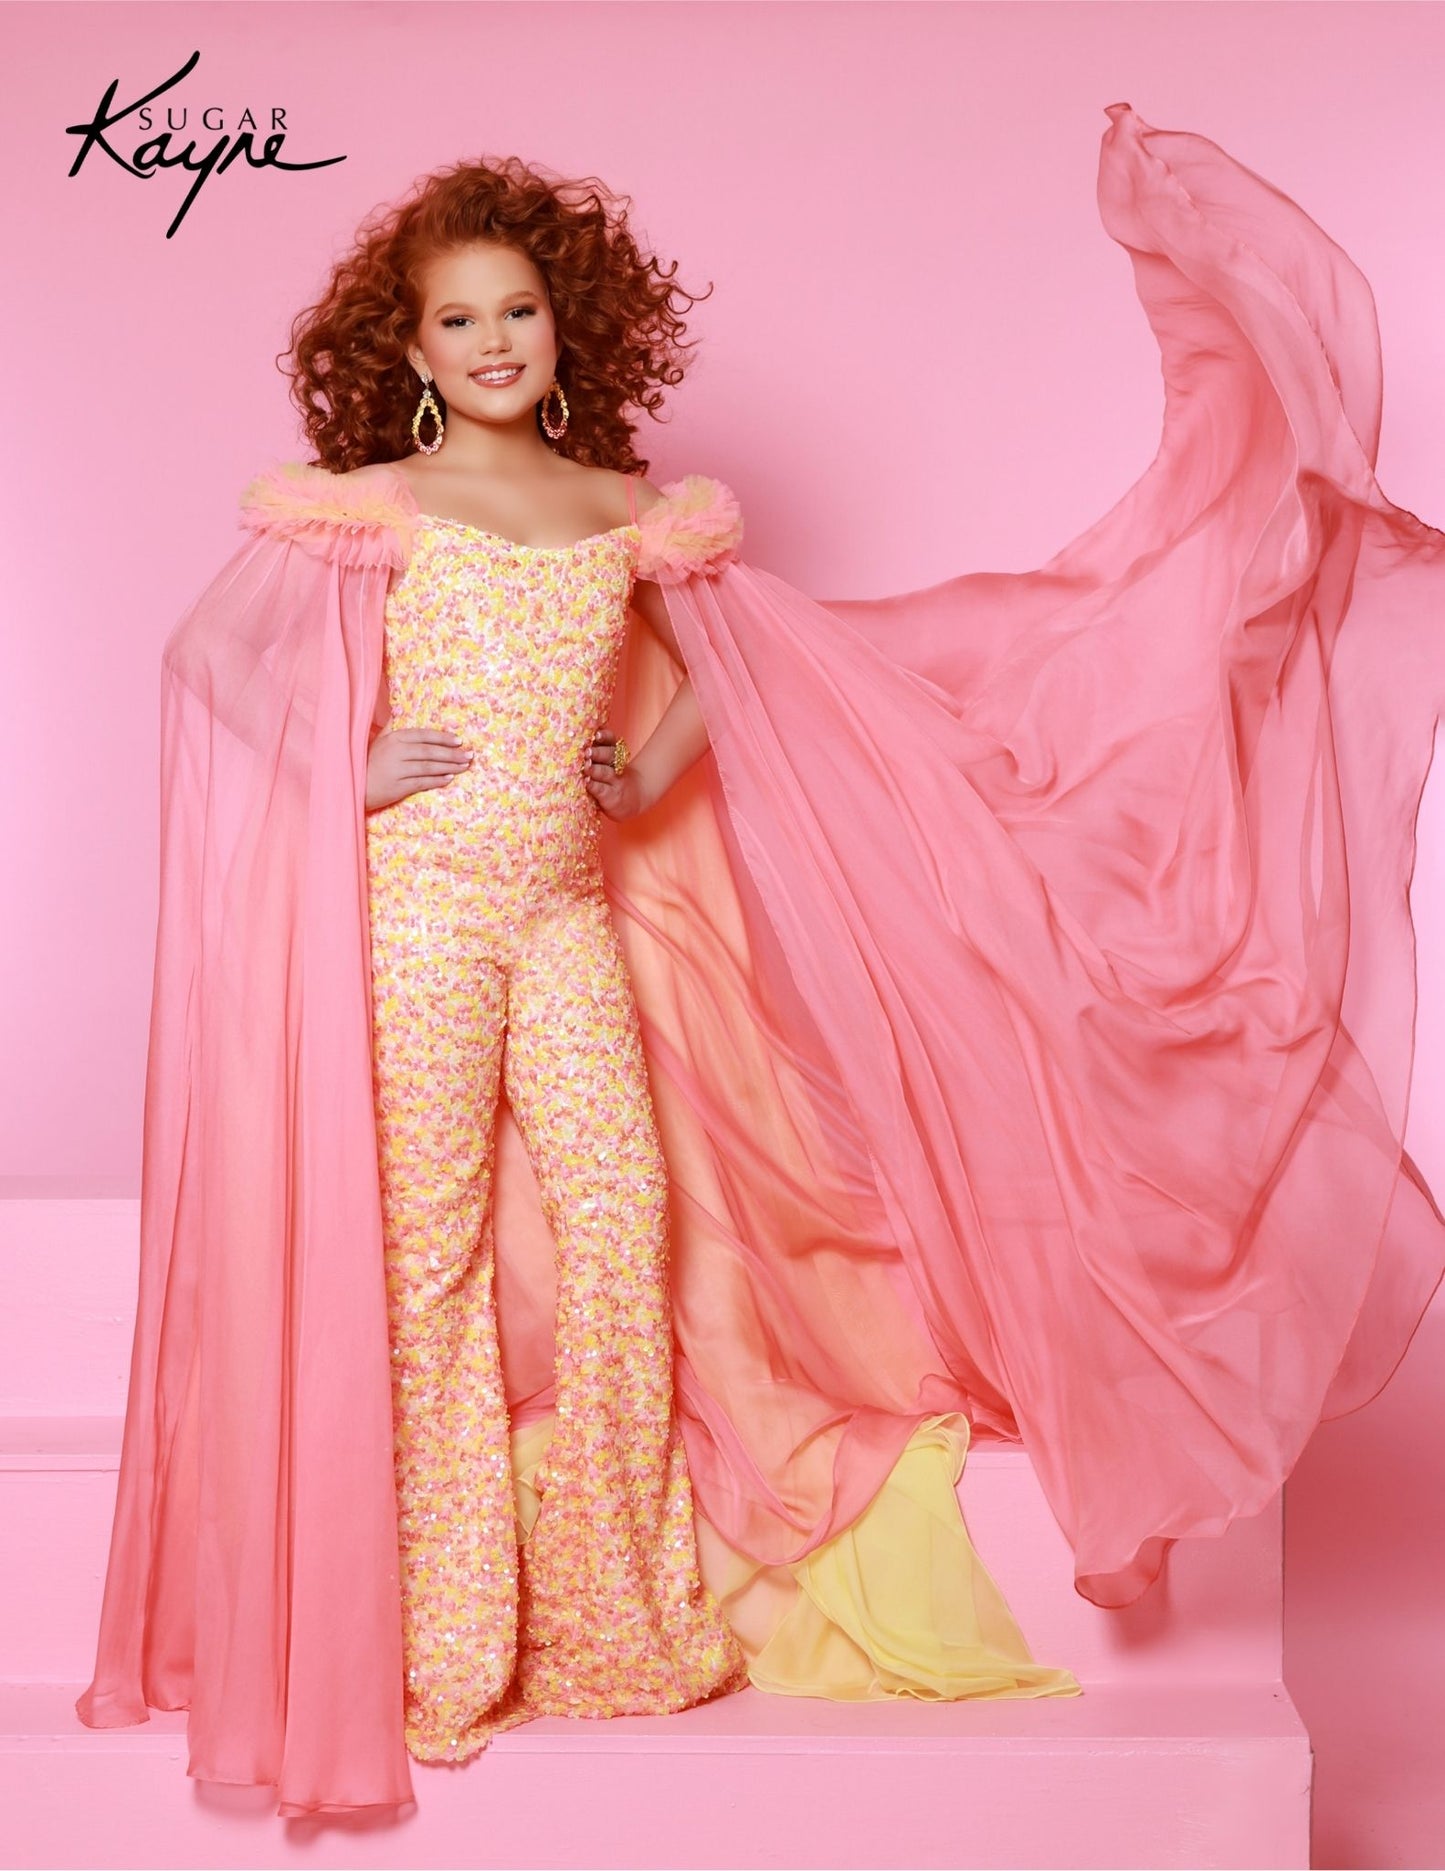 The Sugar Kayne C341 Jumpsuit is the perfect choice for your little princess. This fashionable, comfortable outfit features an all-over sequin design, ruffle sleeves and matching cape for a unique look. Perfect for clinics, pageants and any special occasion. Experience the shimmer sensation in our Sequin Power mesh Jumpsuit and matching cape! The sequined brilliance and ruffles on the shoulders create a look that's enchanting and show-stopping!